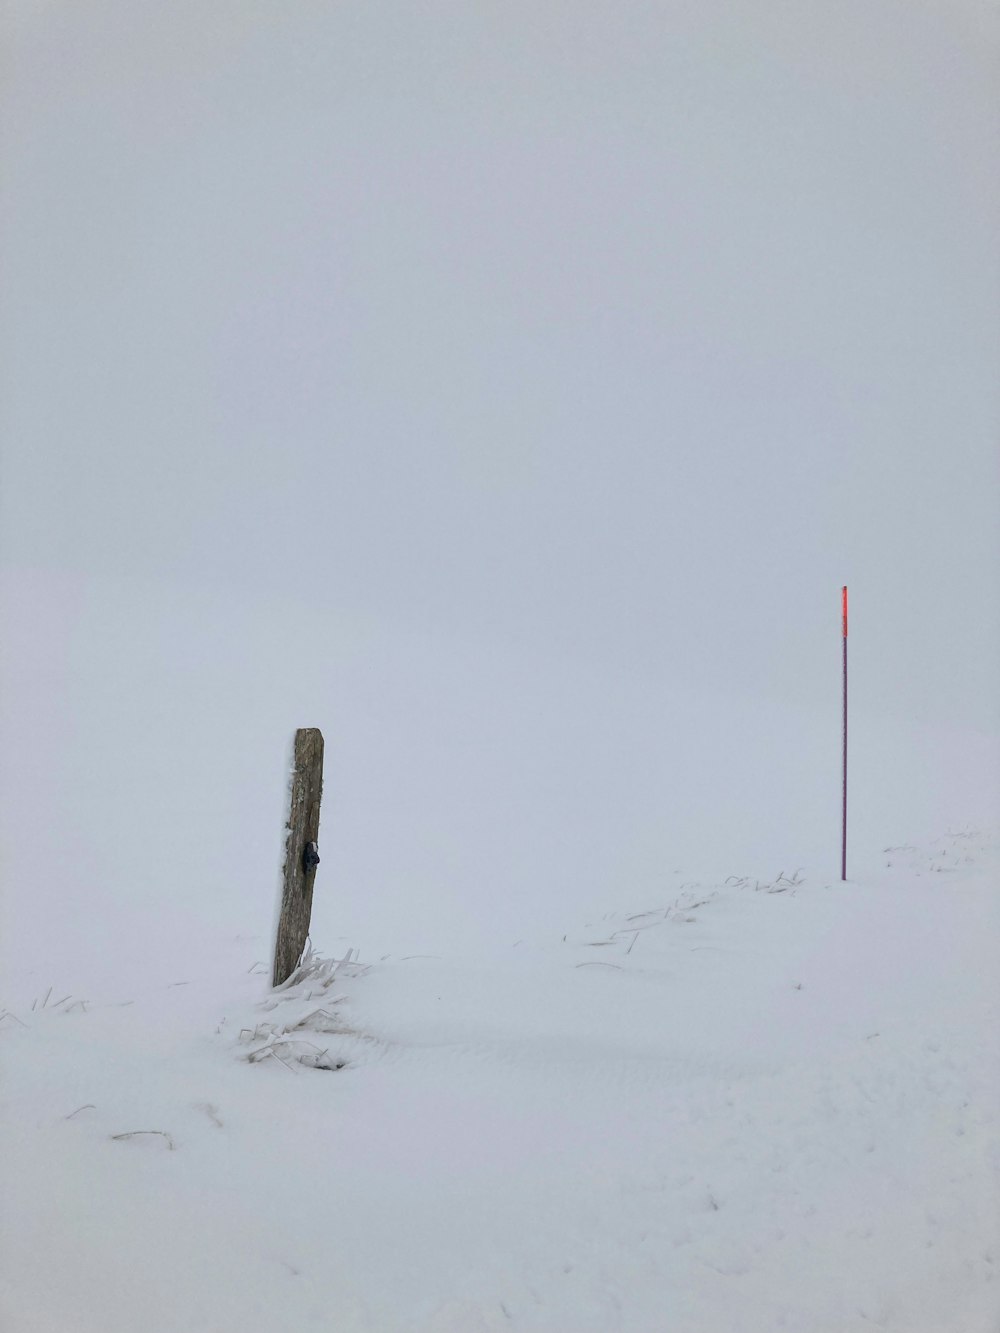 a wooden post in the middle of a snowy field